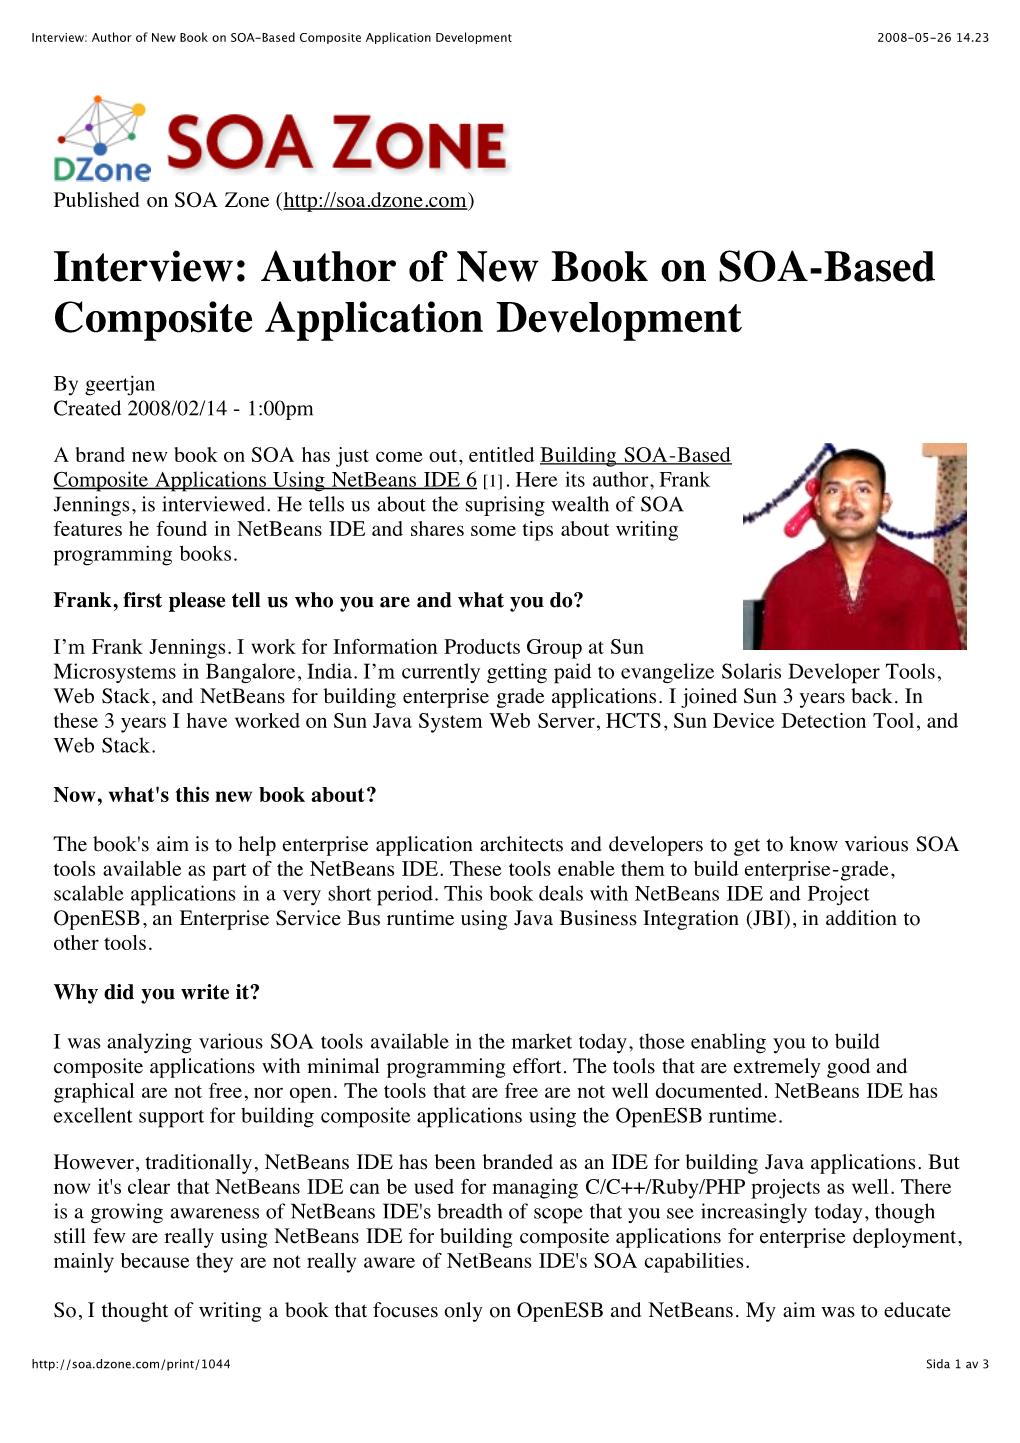 Interview Author of New Book on SOA-Based Composite Application